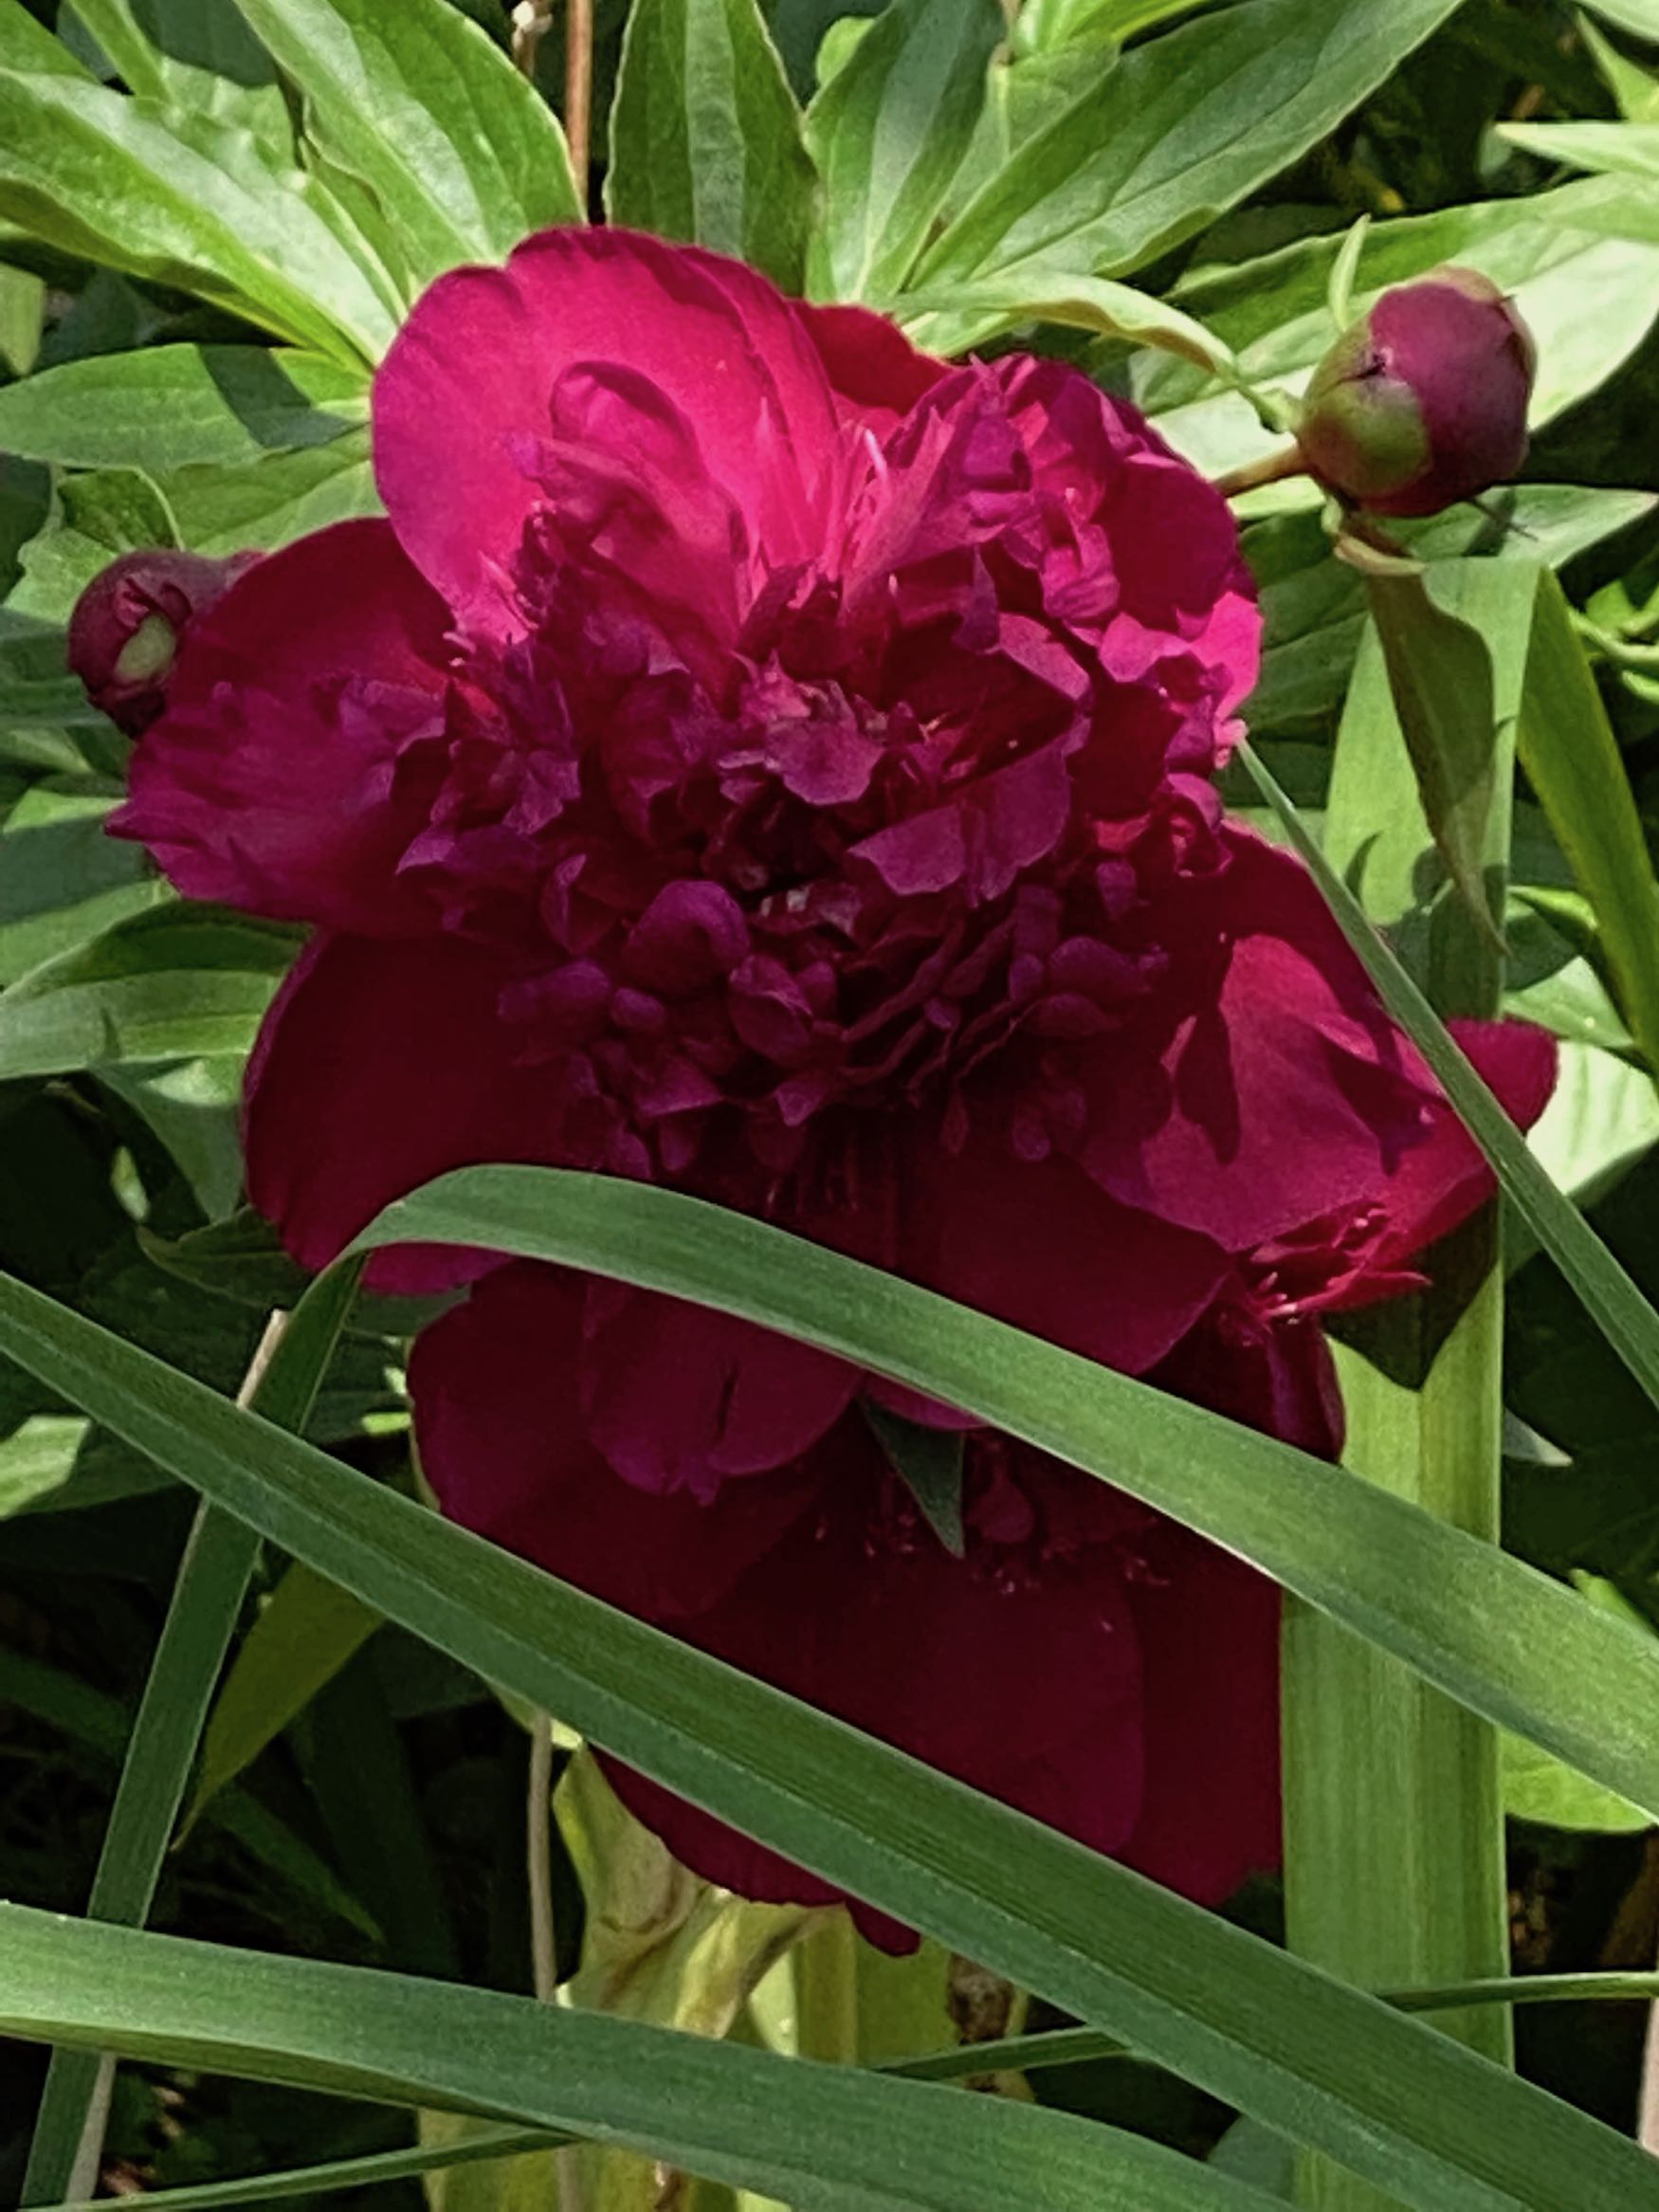 It's the weekend! Number 253, A Single Red Peony, Partly in Shadow